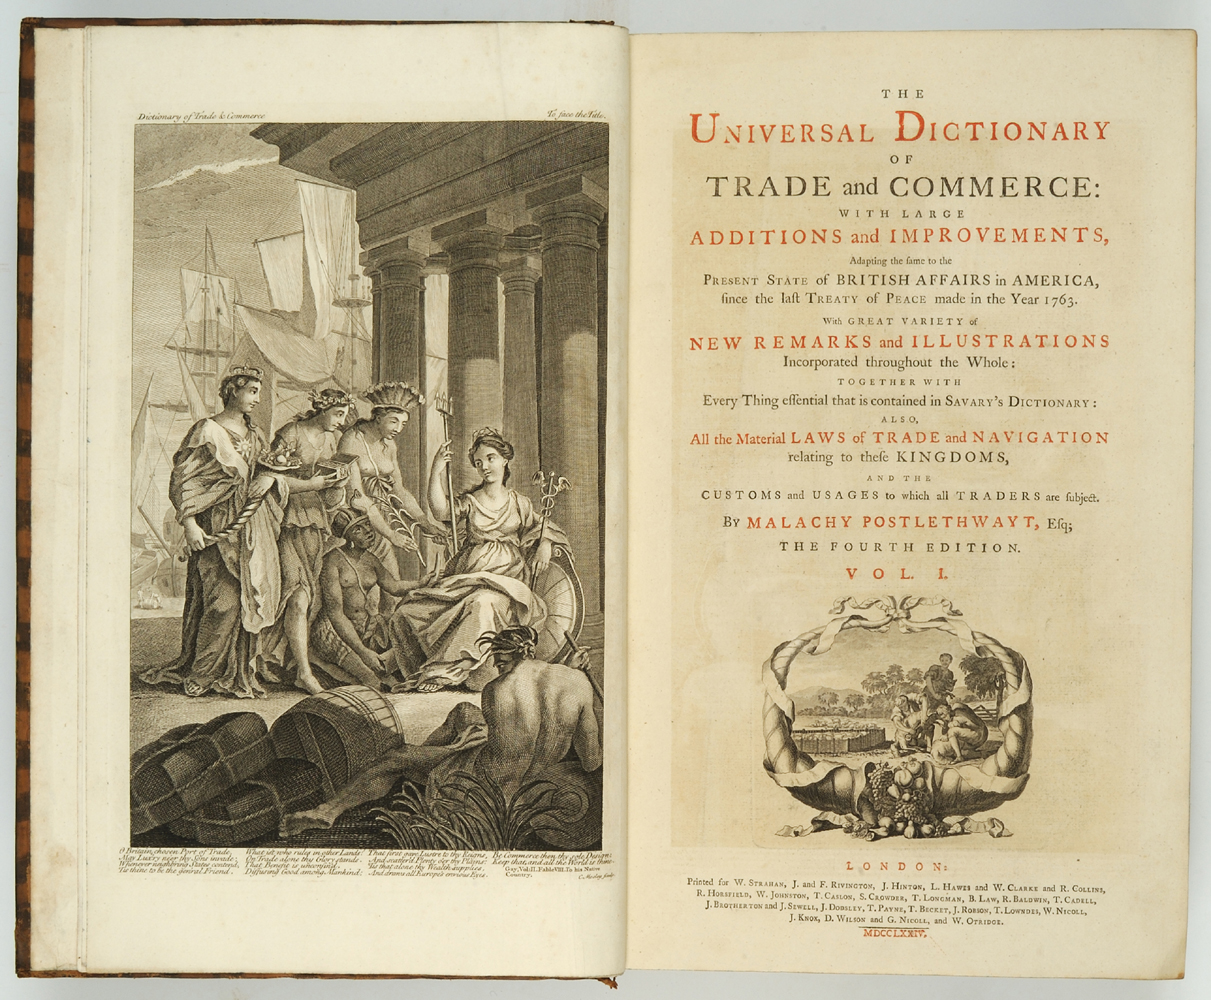 The Universal Dictionary of Trade and Commerce by Malachy Postlethwayt, 1774